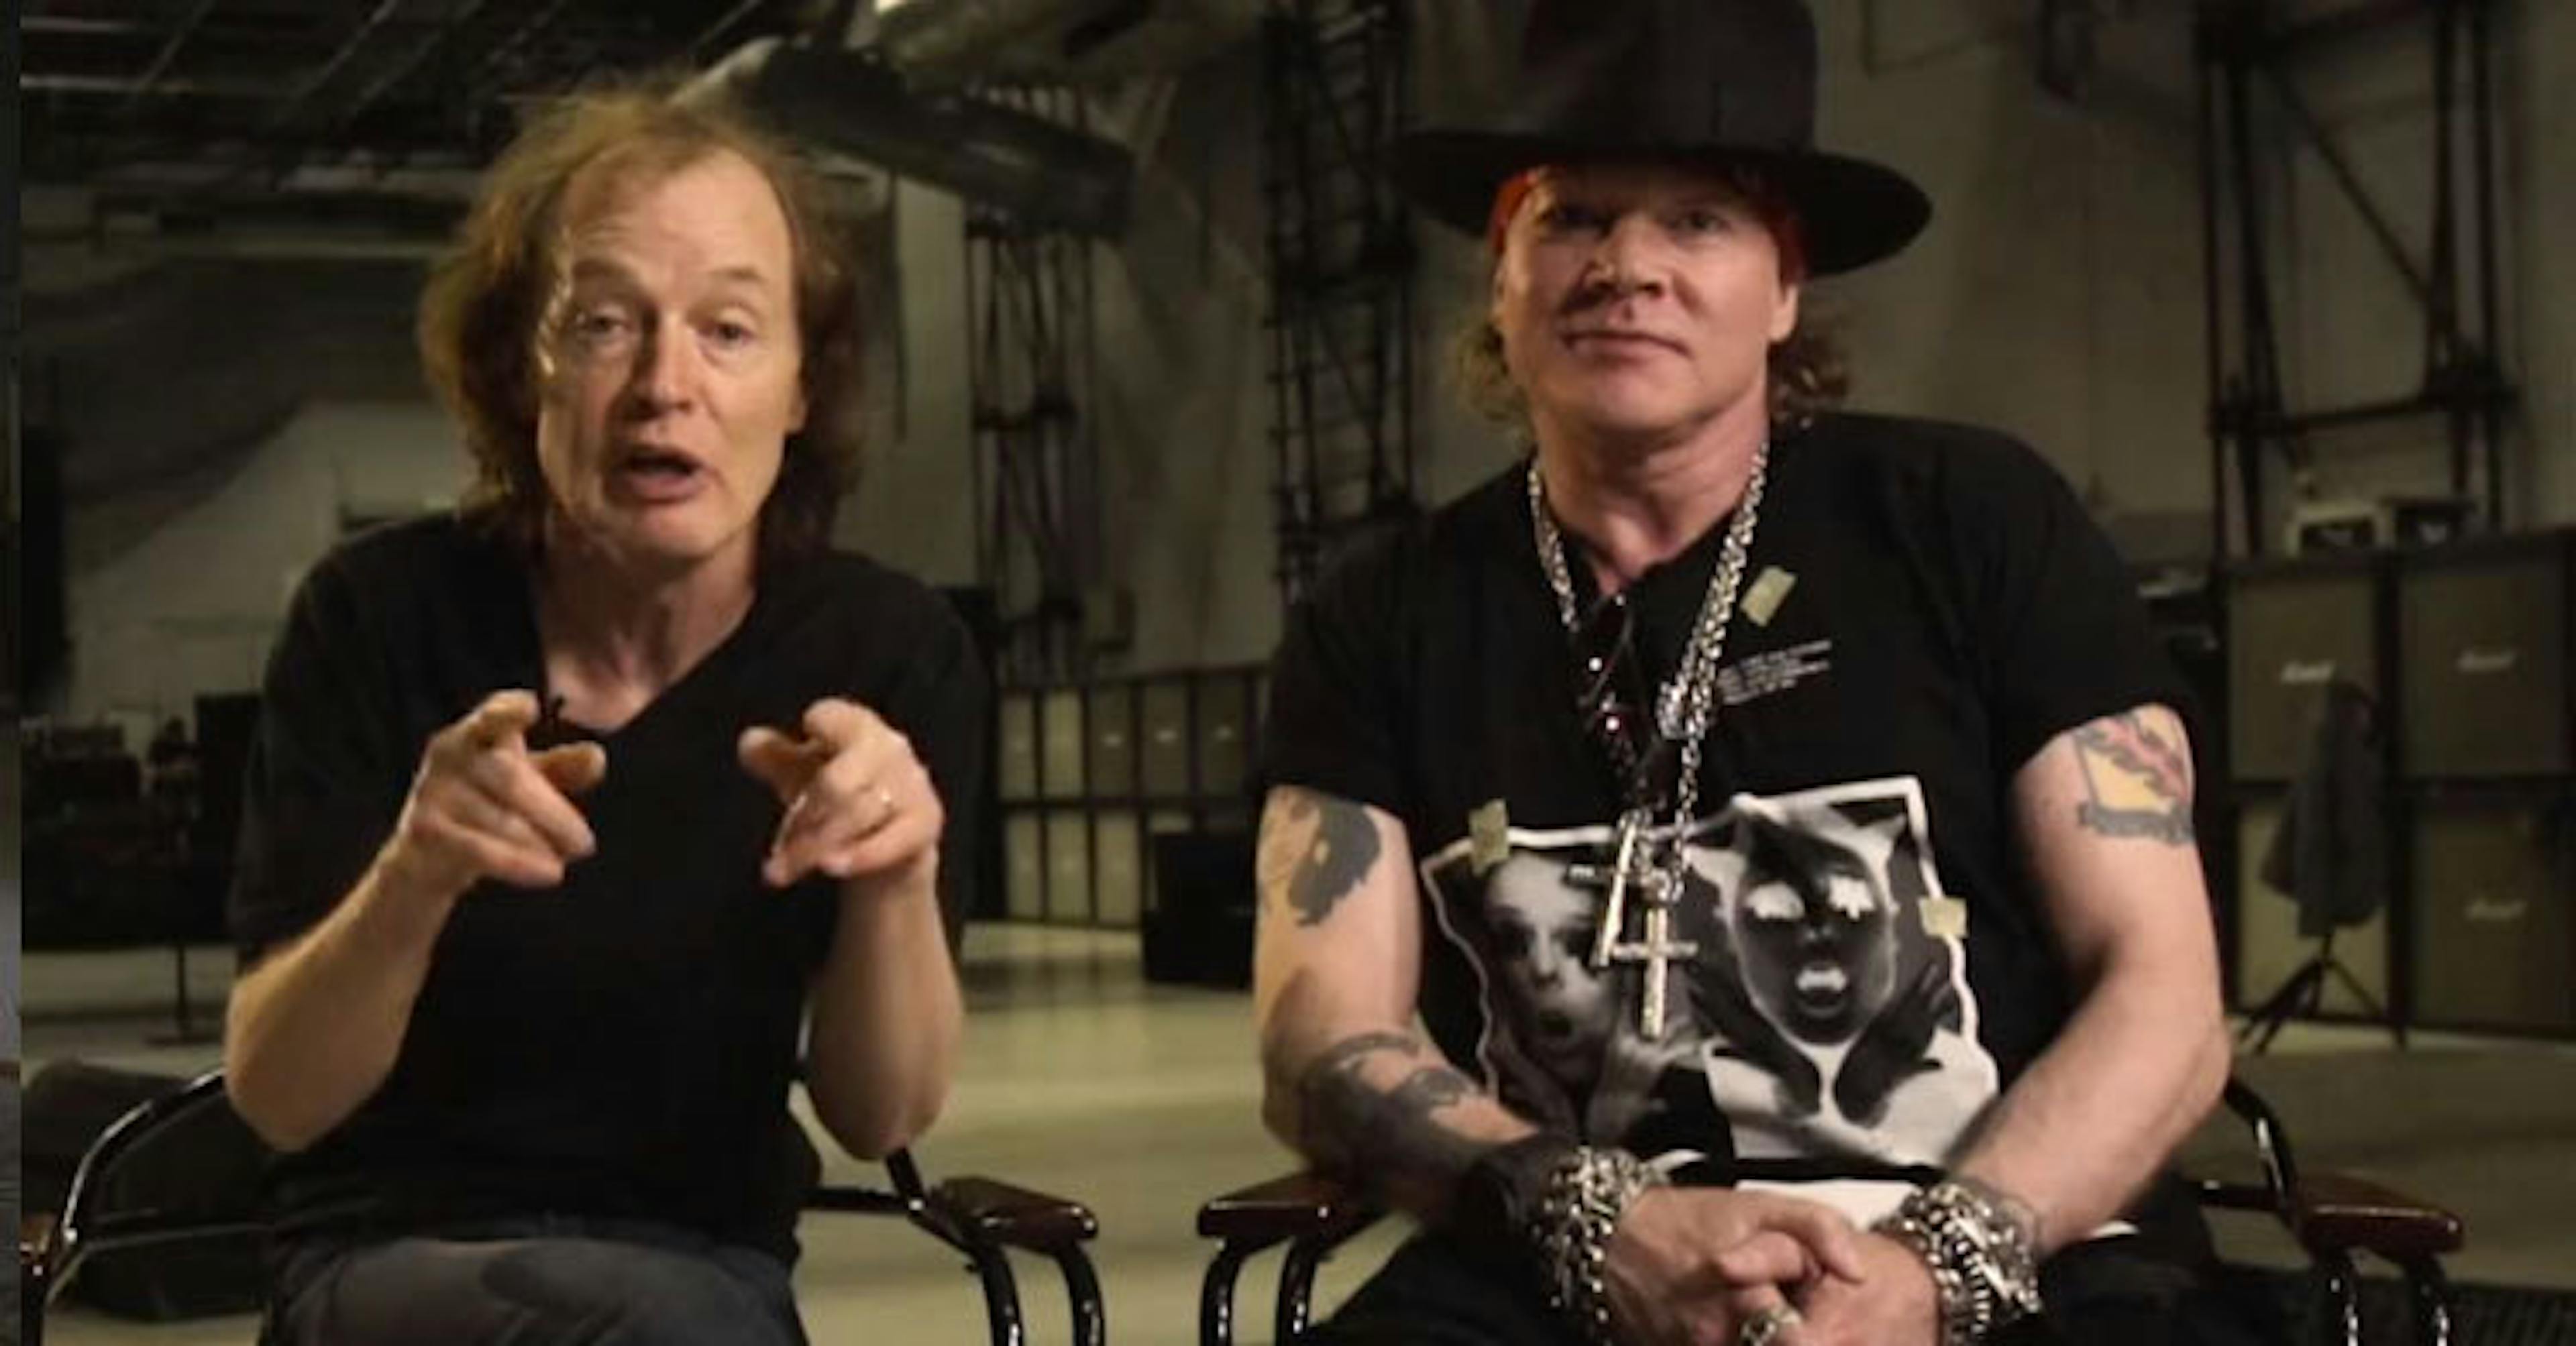 AC/DC And Axl Rose Appear Together For The First Time